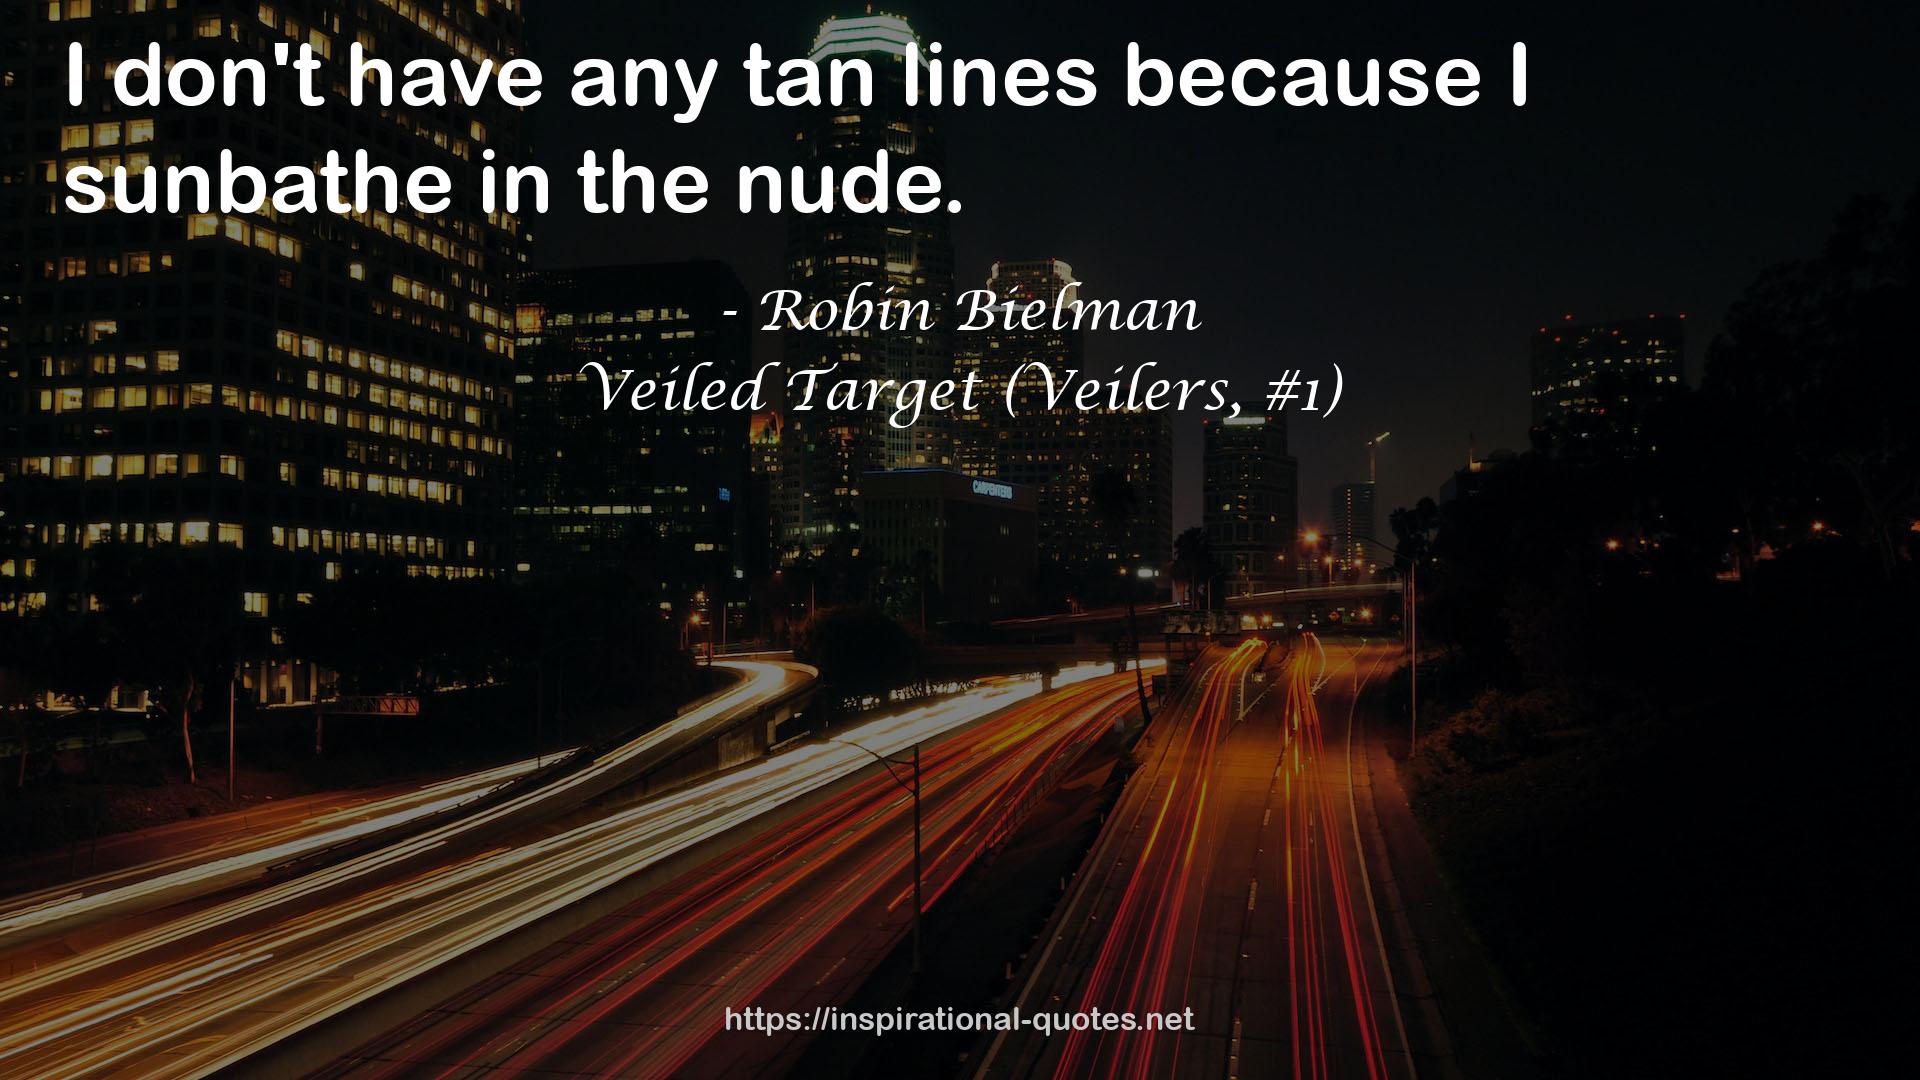 Veiled Target (Veilers, #1) QUOTES